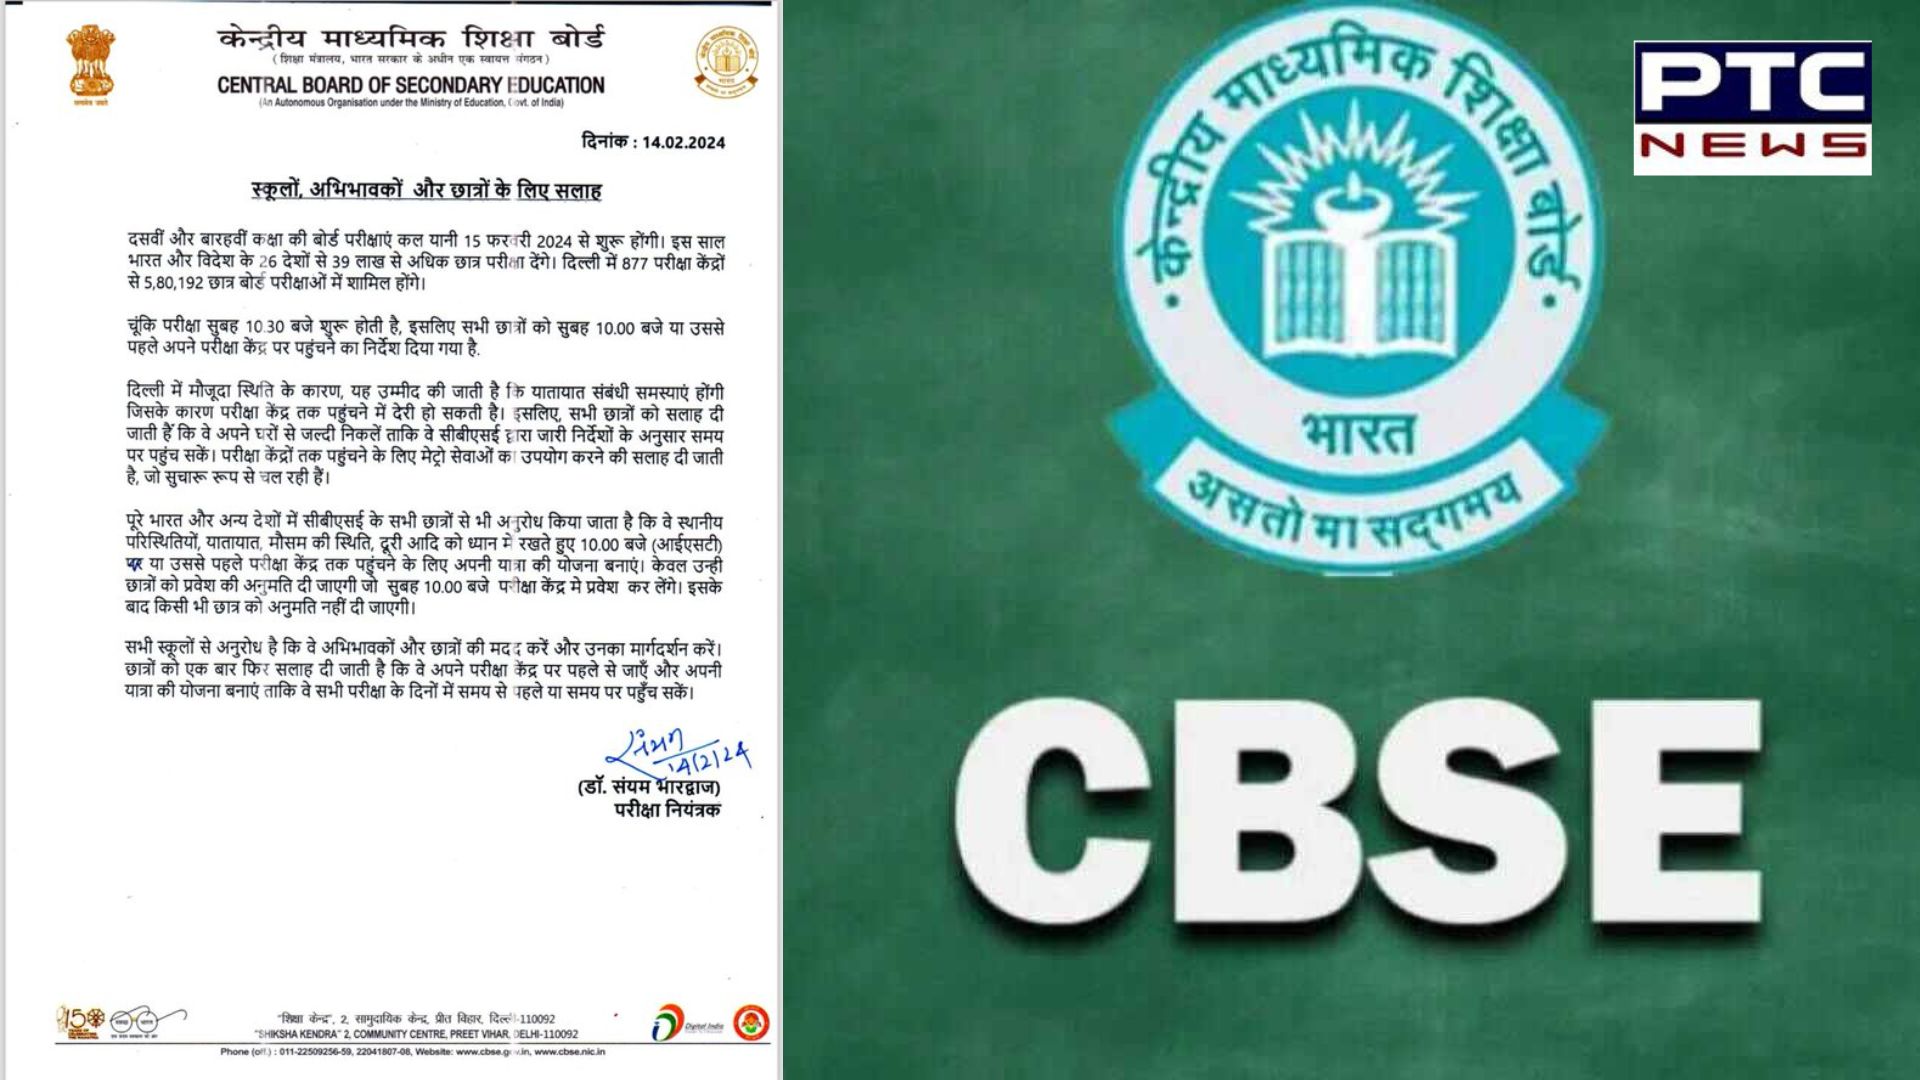 Board Exams 2024: CBSE issues circular for schools, students, and parents; check here